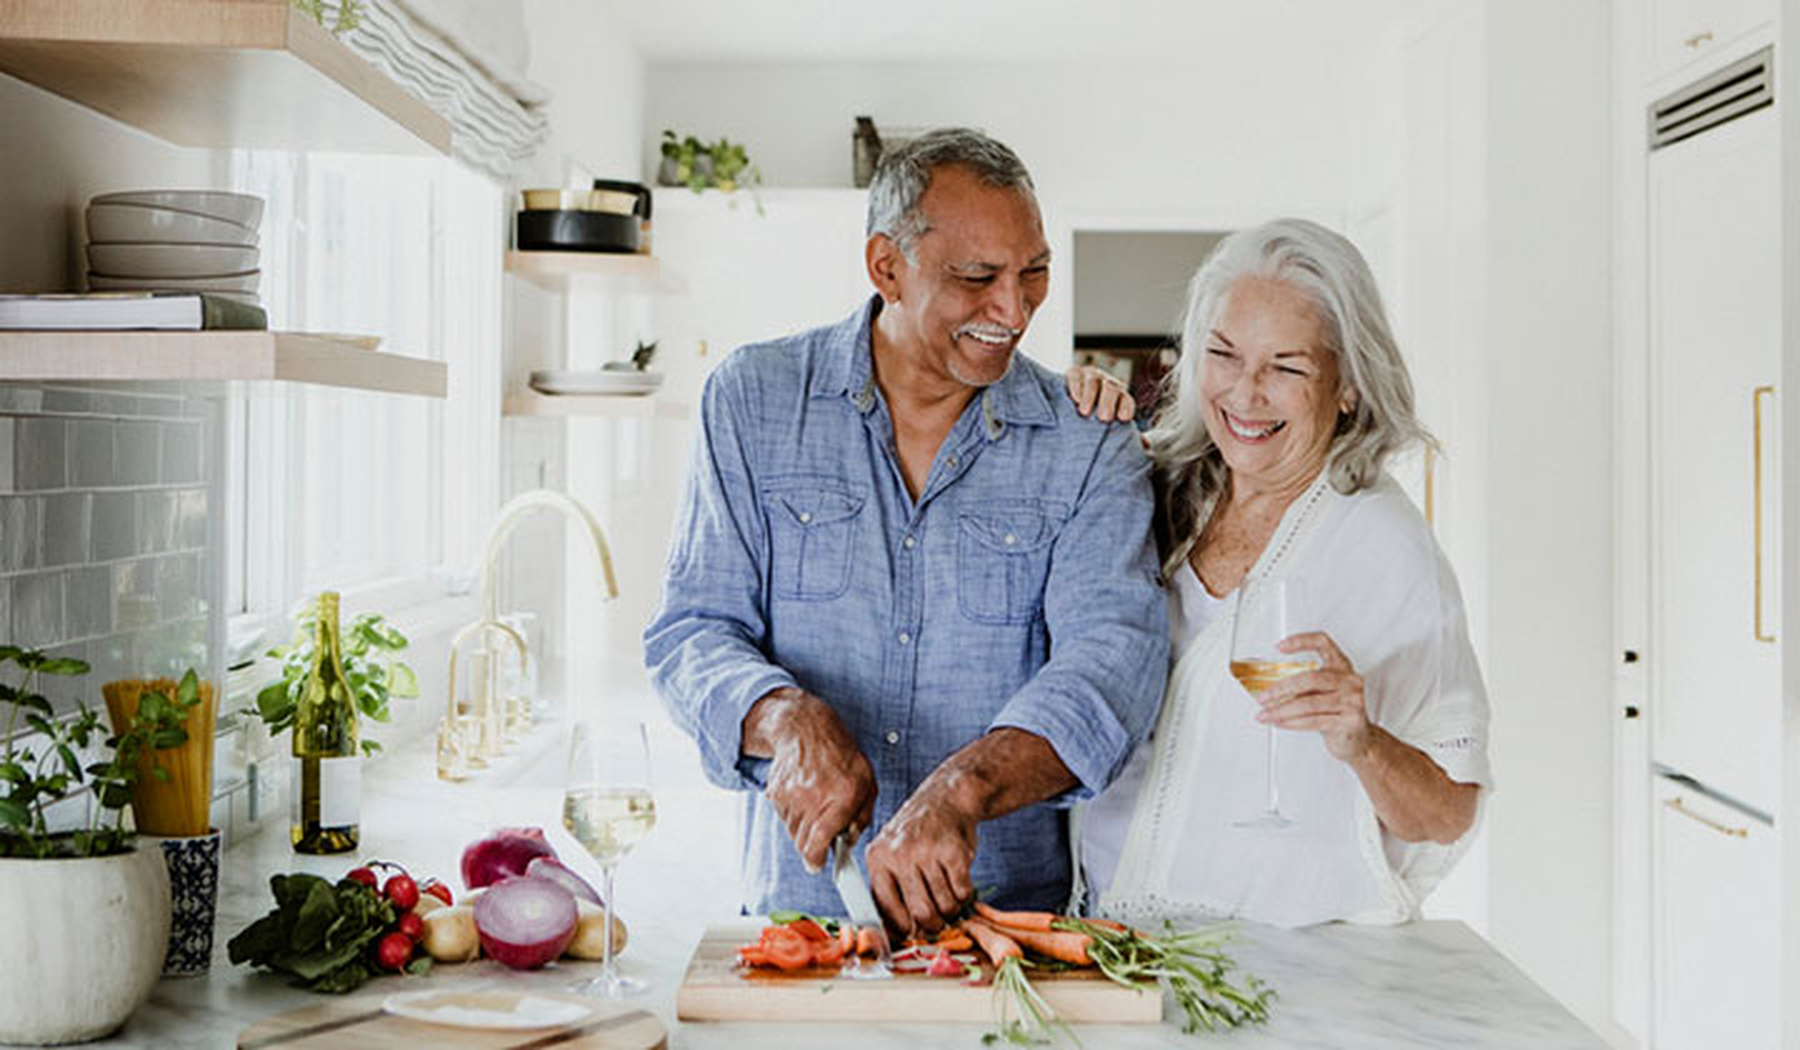 Smiling older couple cooking together in the kitchen